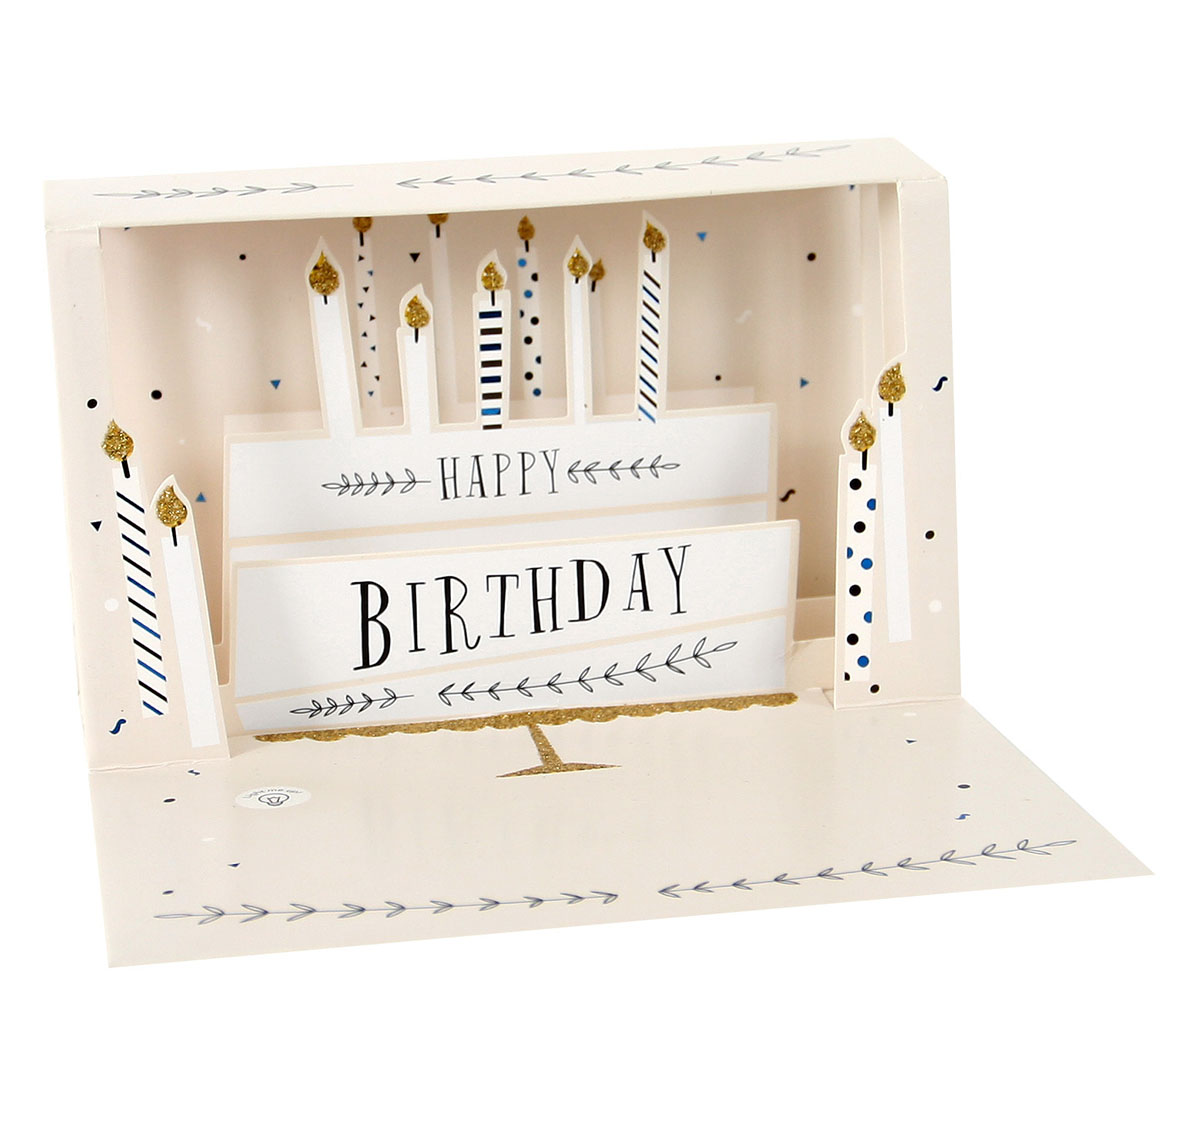 Cake Delighted Shadowbox Card with LED lights